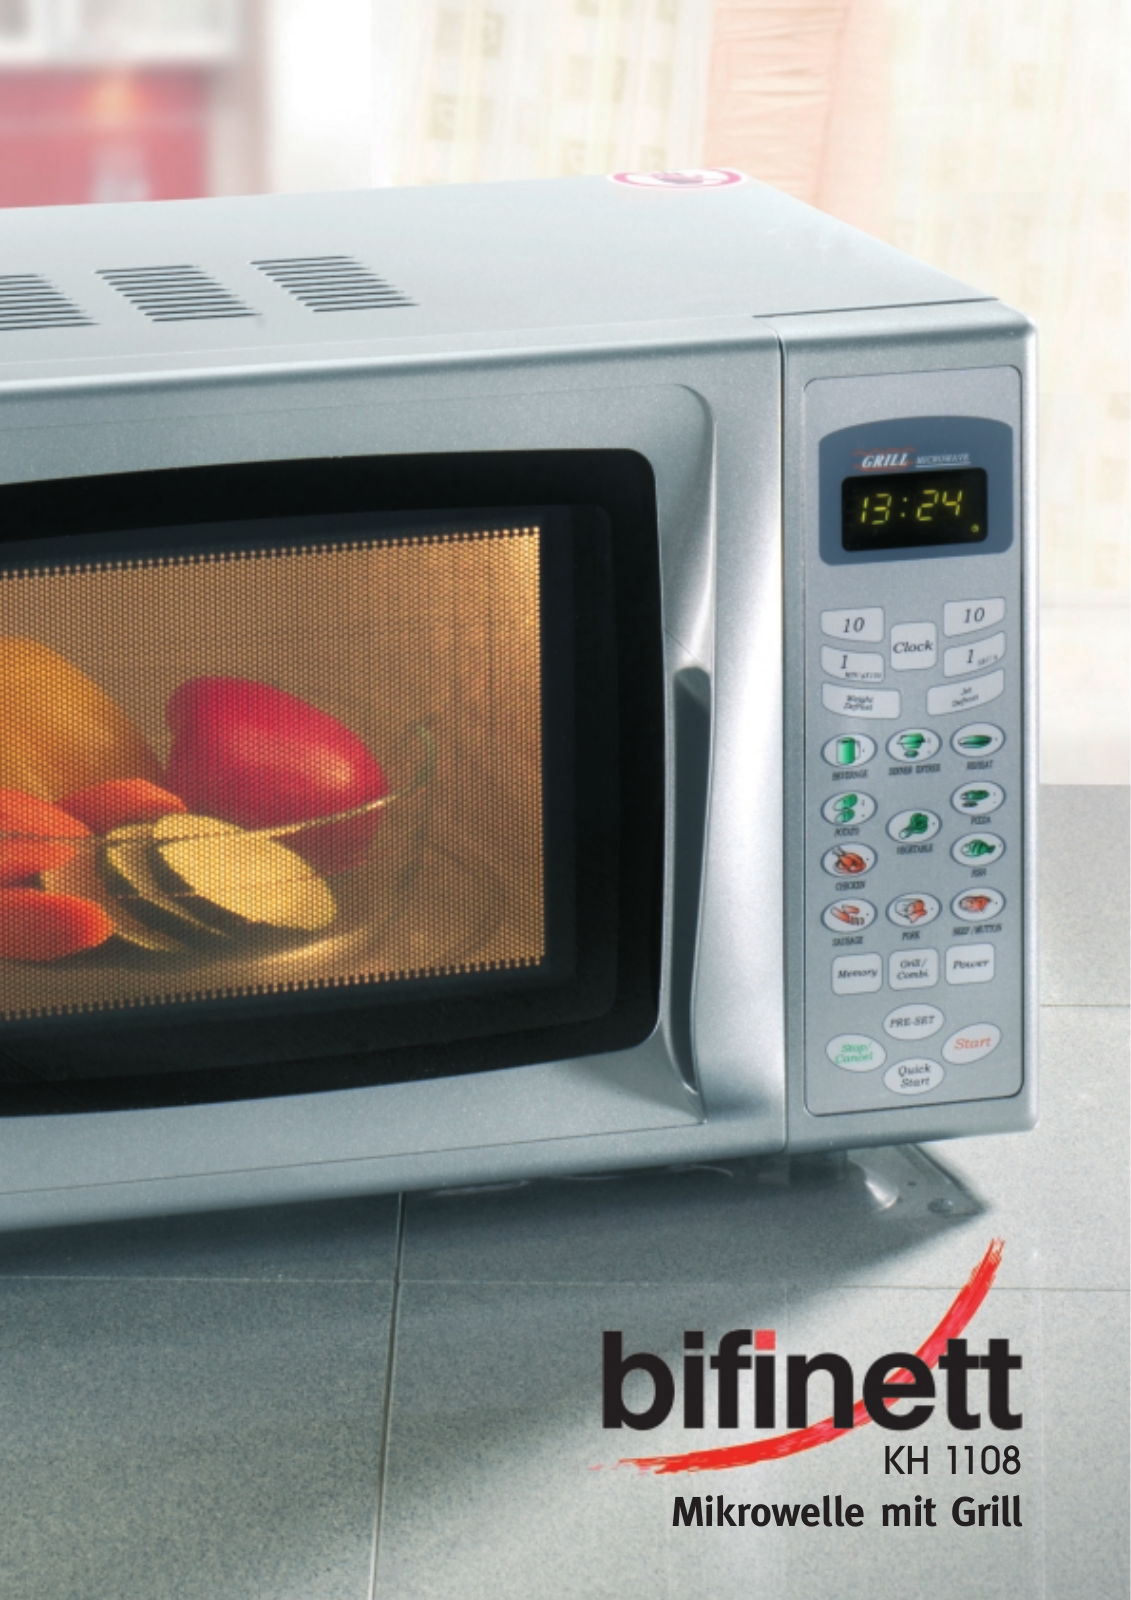 BIFINETT KH 1108 MICROWAVE OVEN WITH GRILL, KH1108 User Manual